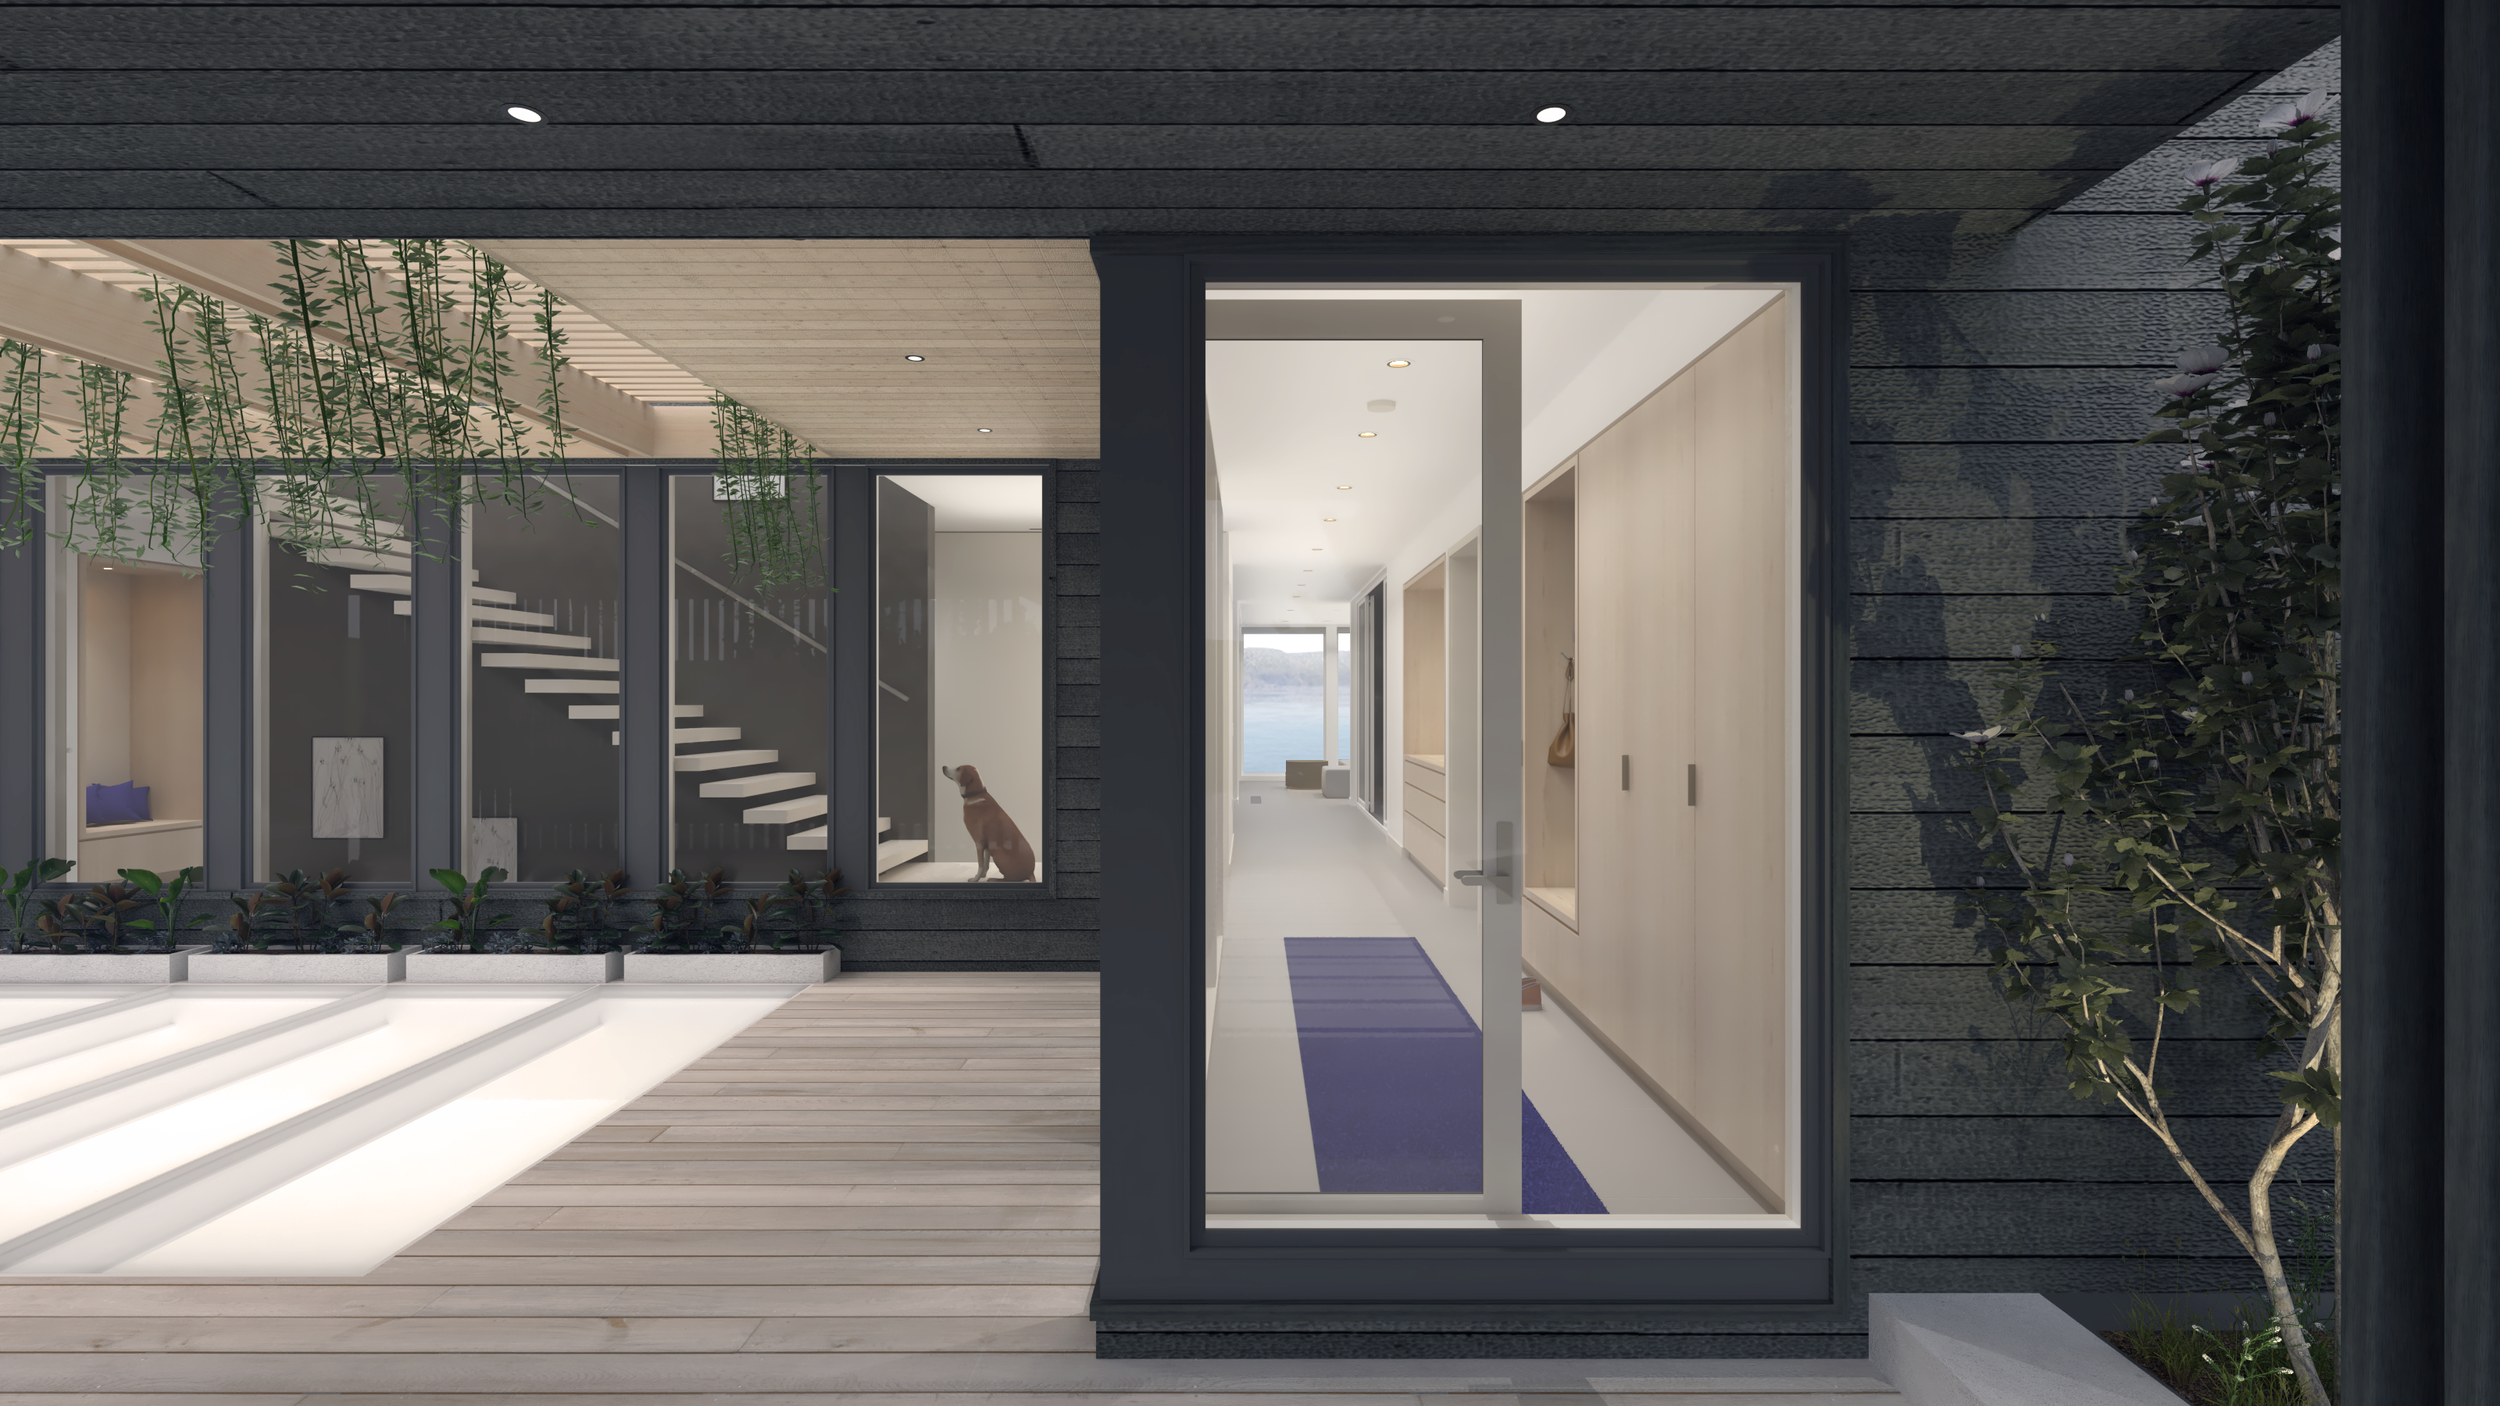 02-re4a-resolution-4-architecture-modern-modular-prefab-briarcliff-manor-residence-entry.png